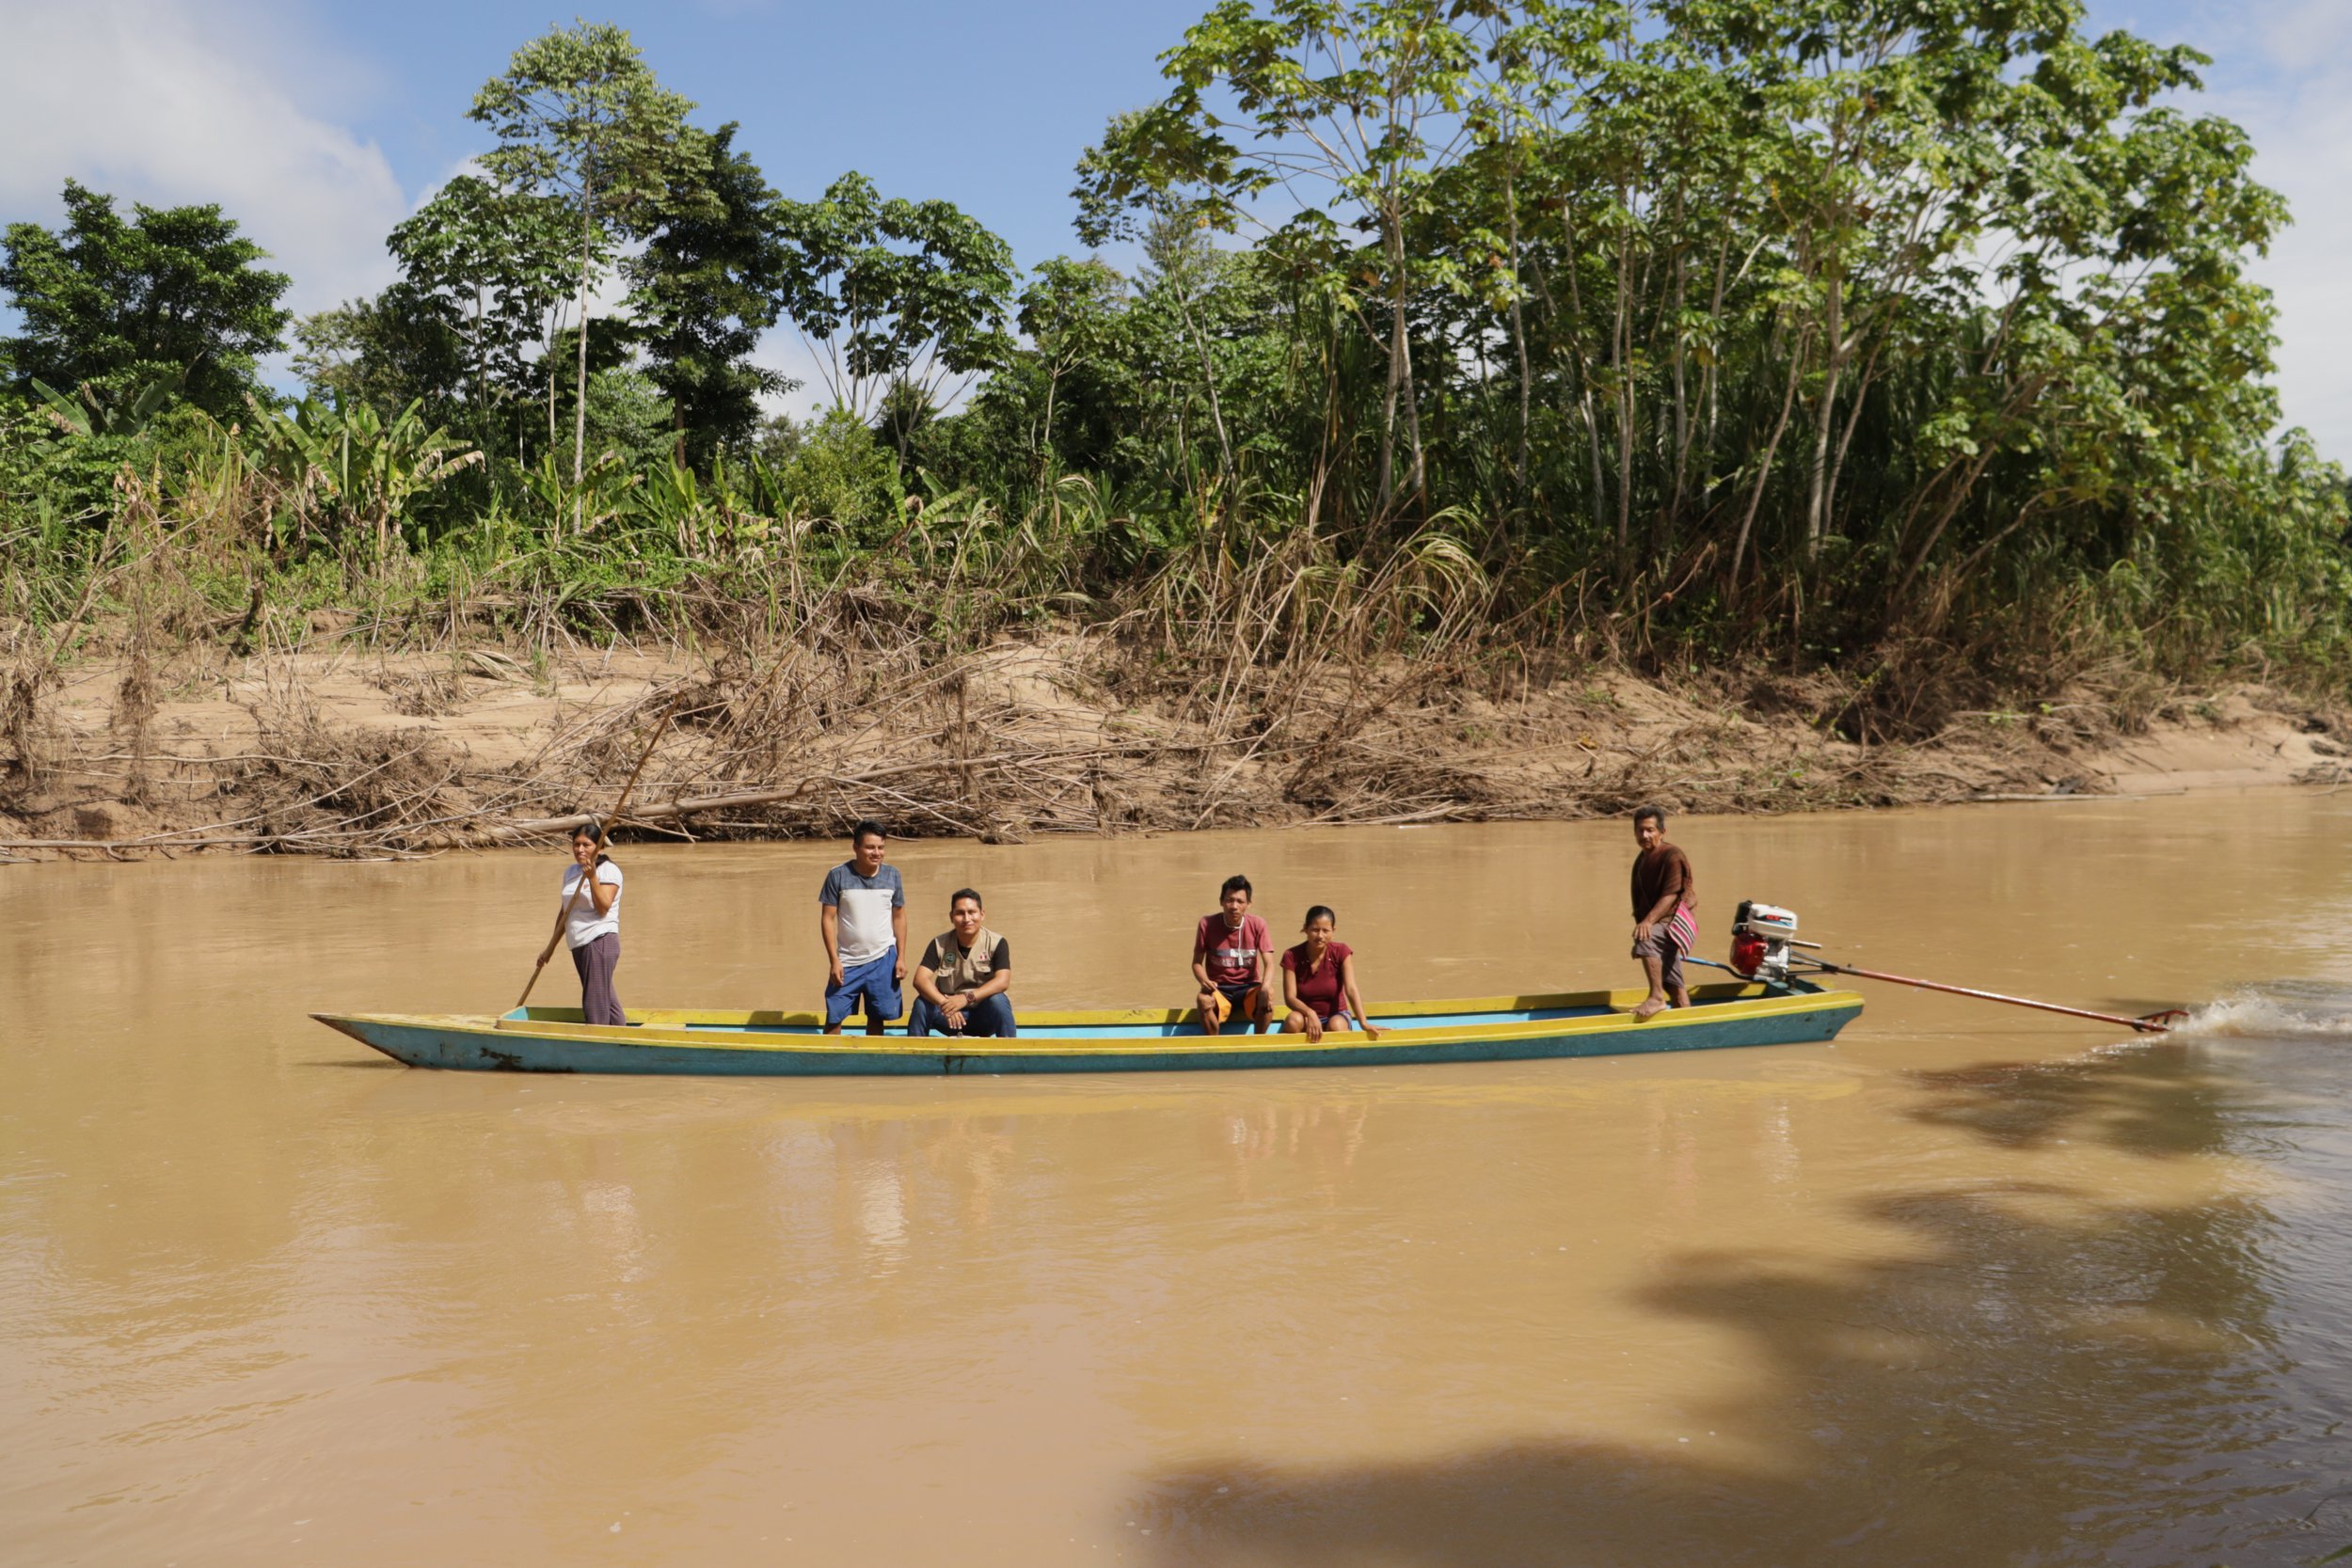  Members of the Saweto vigilance committee using its new boat and motor.  